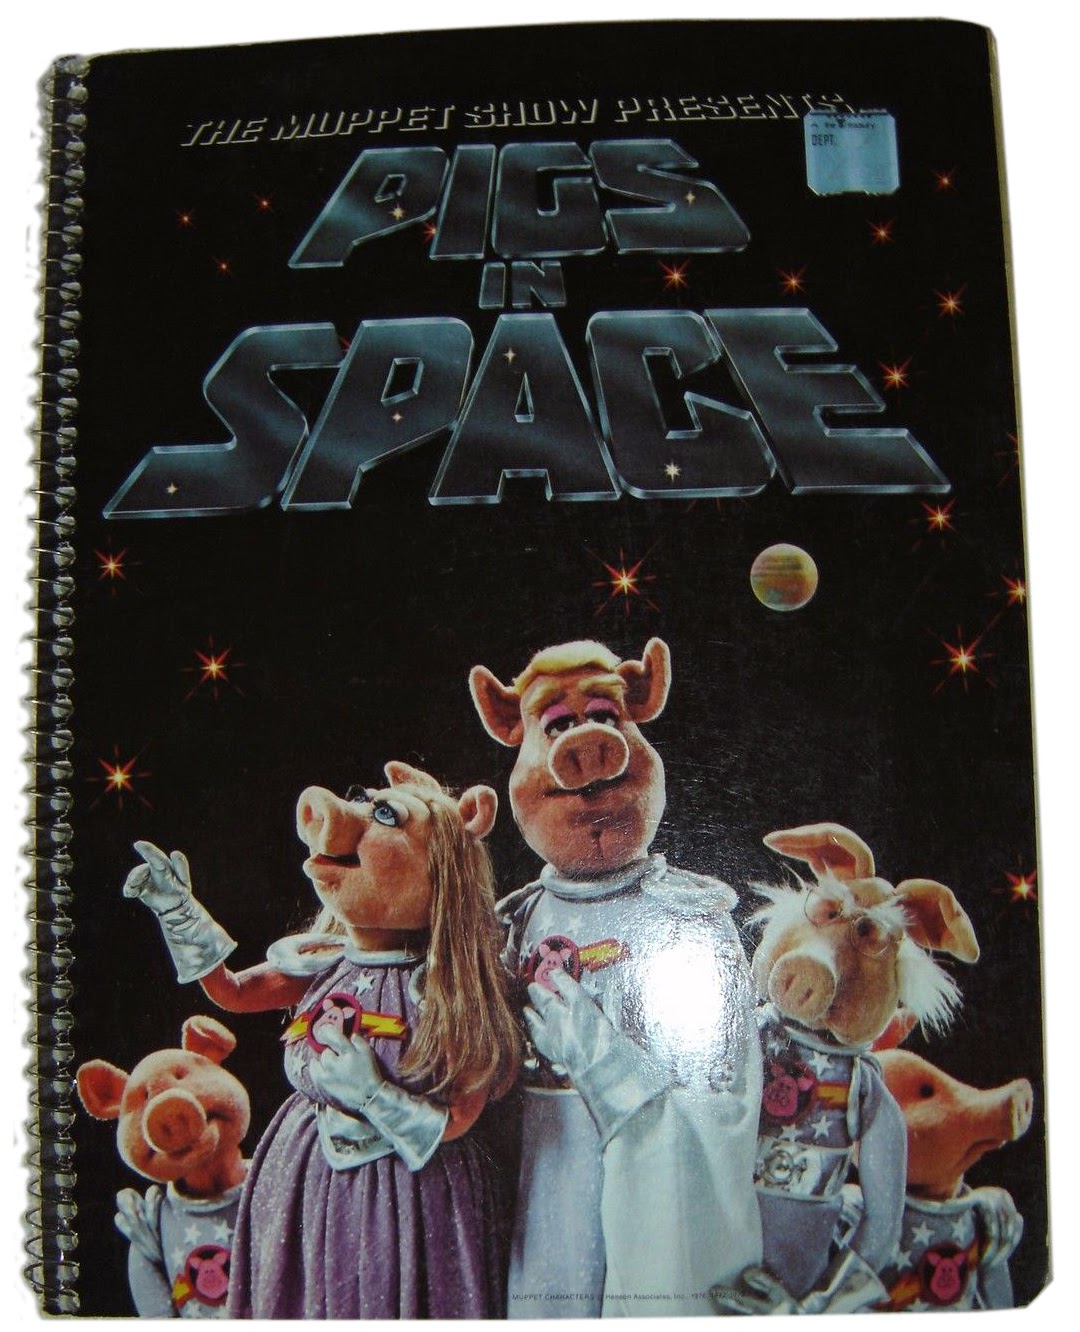 1978 VINTAGE SWEDISH THE MUPPETS SET GUM CARD #26 PIGS IN SPACE